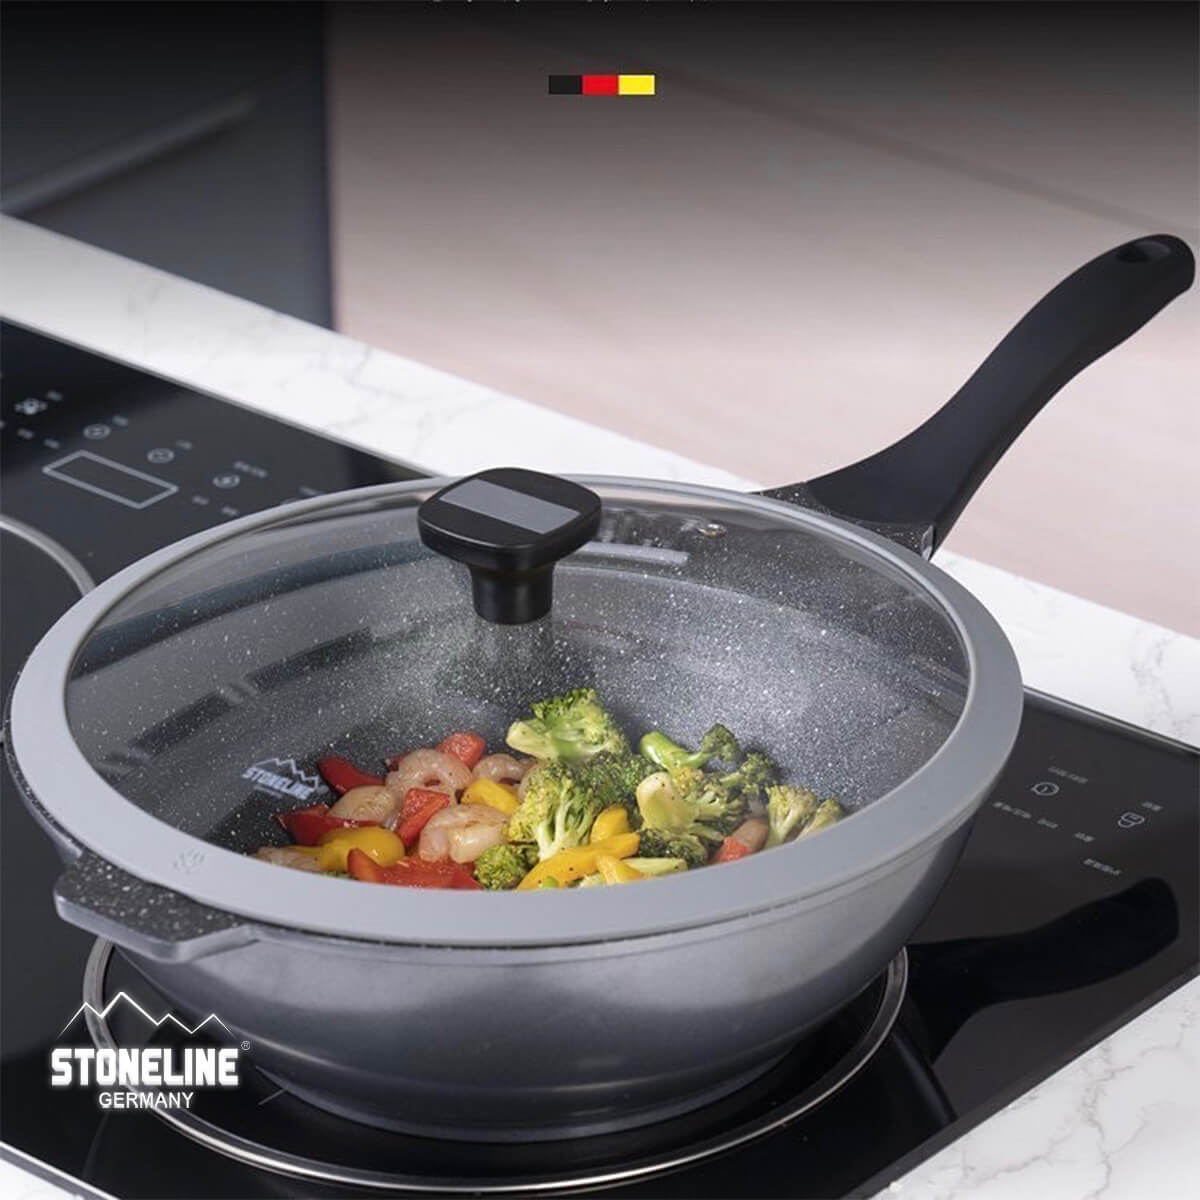 Stoneline Professional Serving Wok 30cm with Magnetic Coaster 